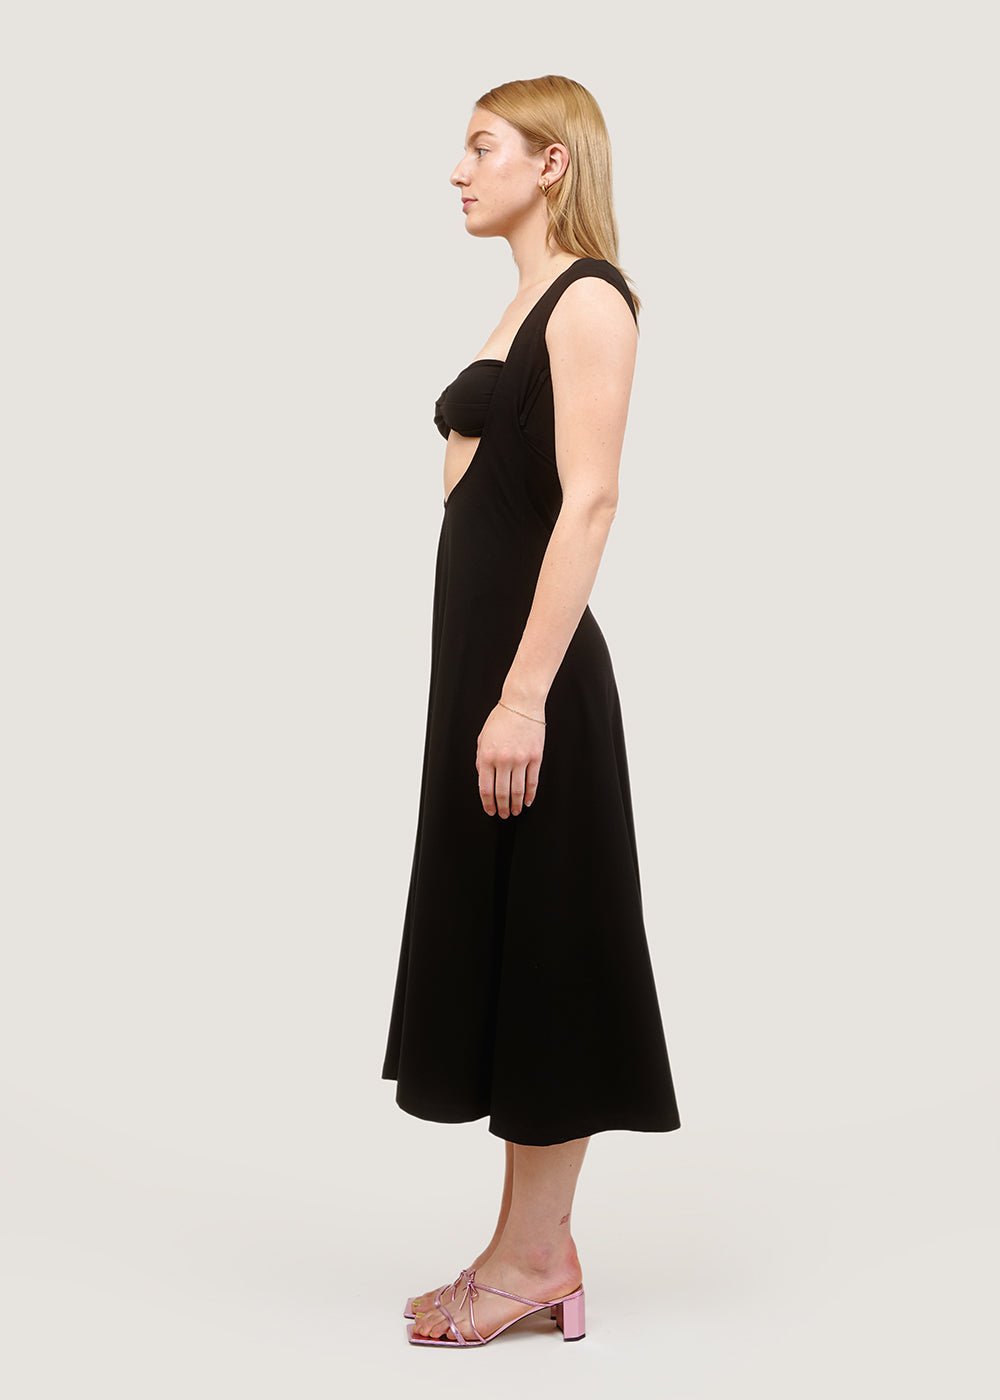 Beaufille Black Baes Dress - New Classics Studios Sustainable Ethical Fashion Canada